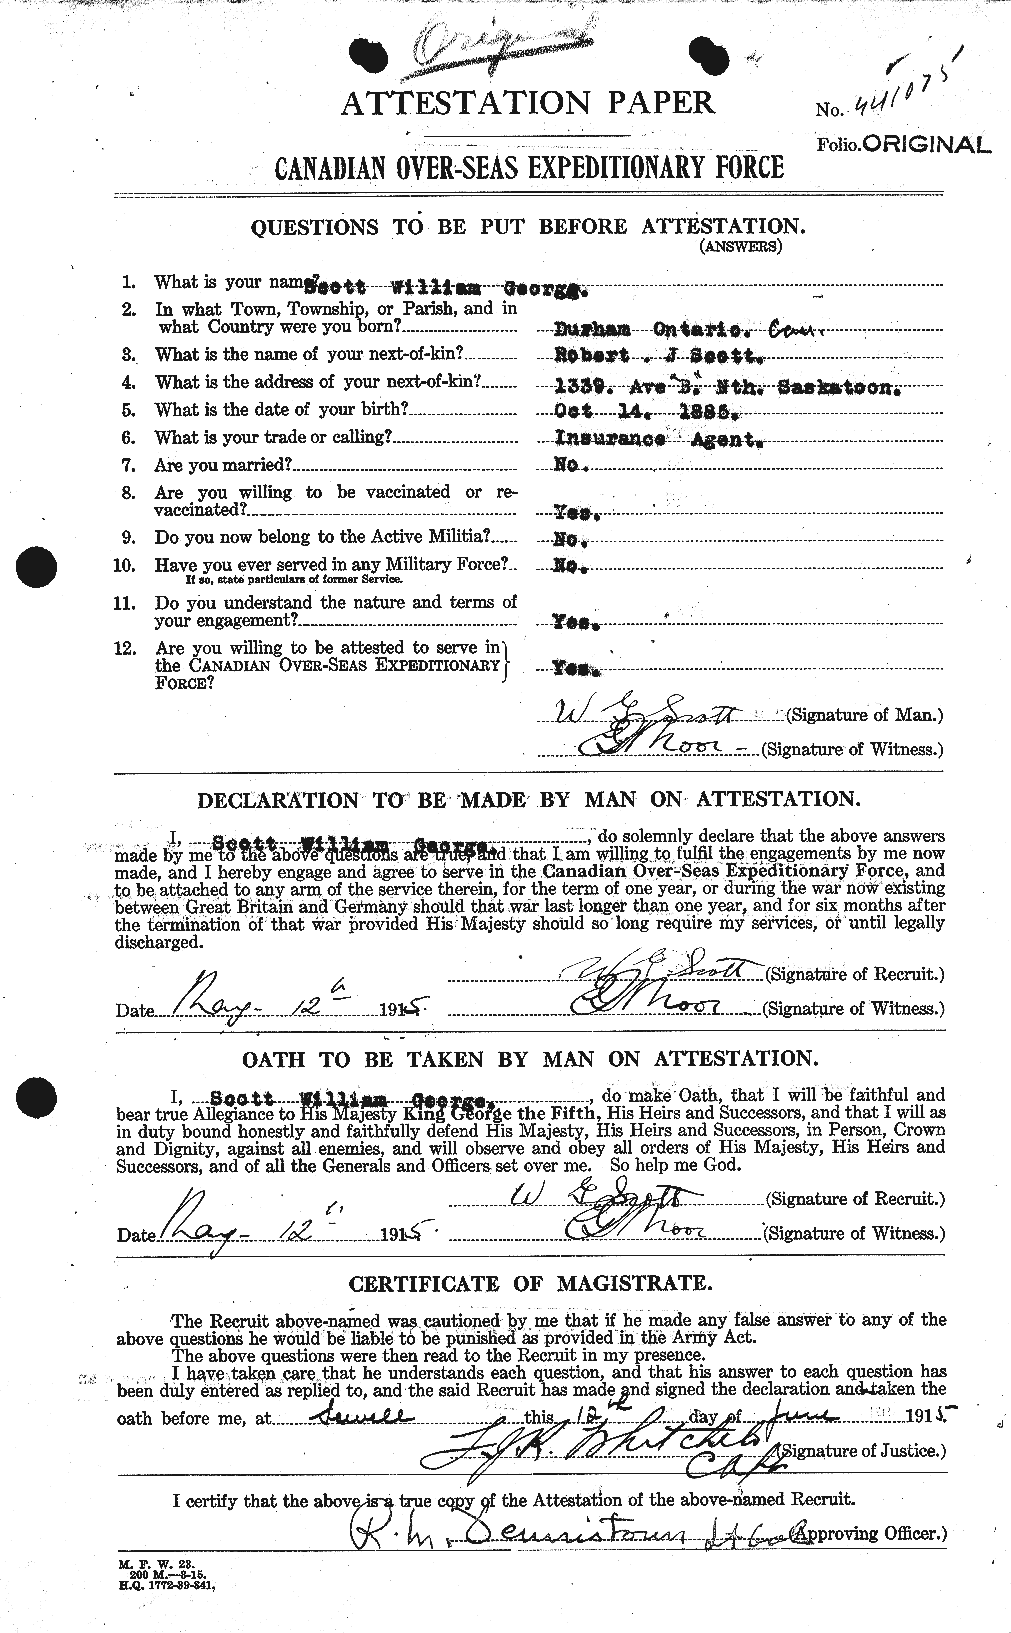 Personnel Records of the First World War - CEF 087014a